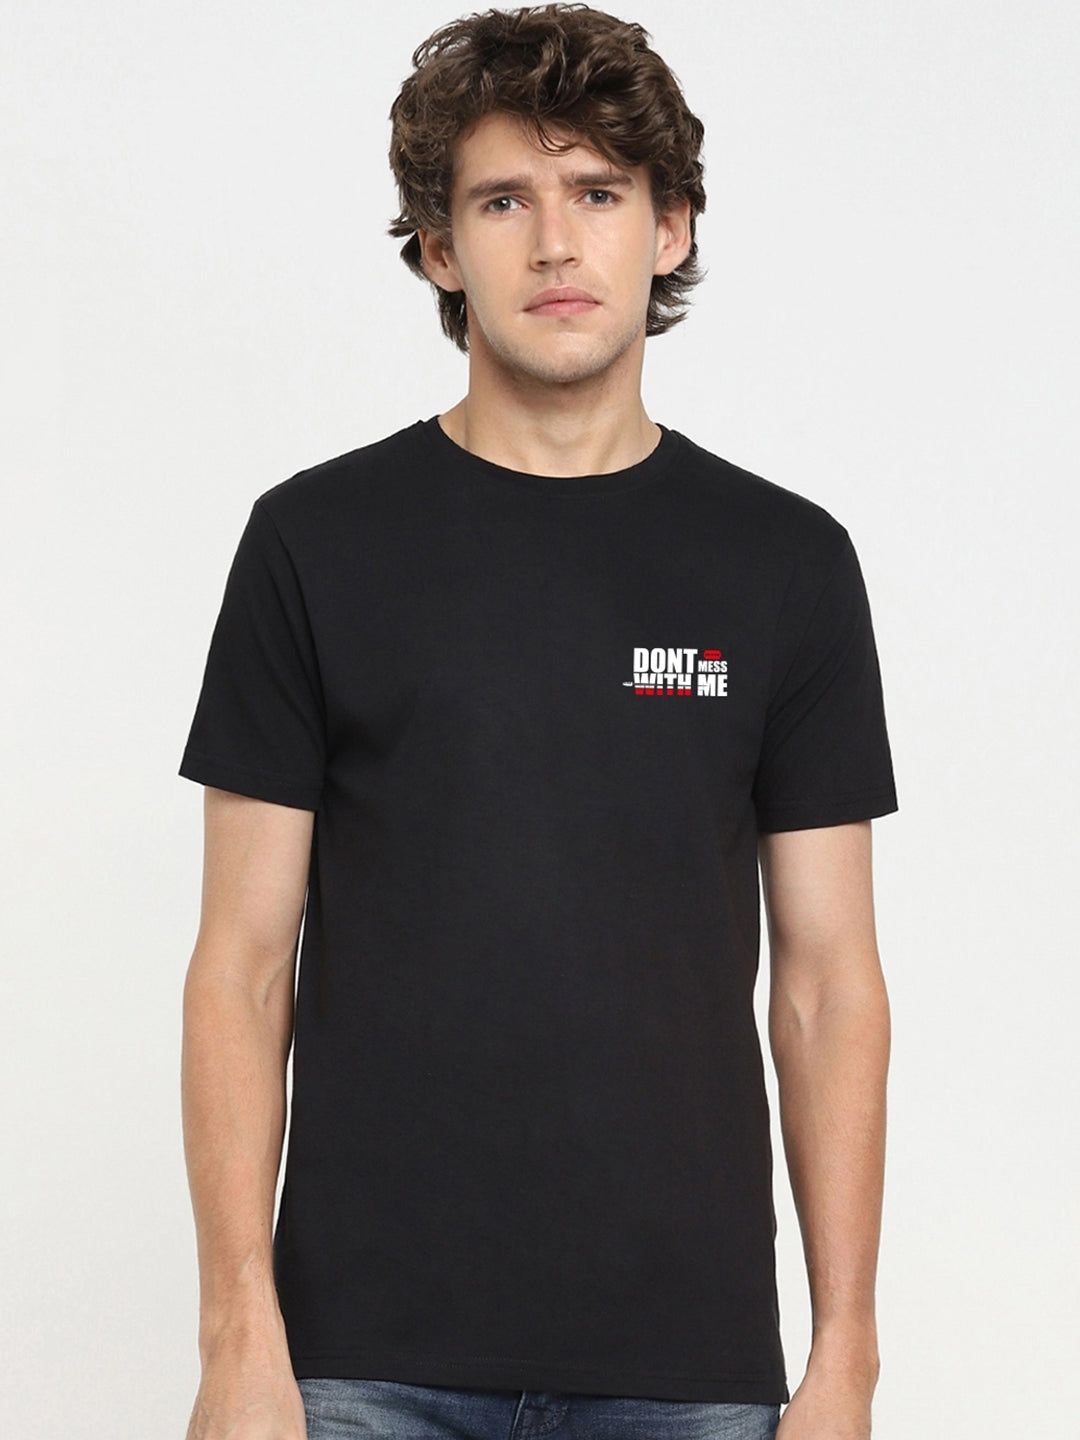 Men's Dont With Print Graphic Slim Fit Tee